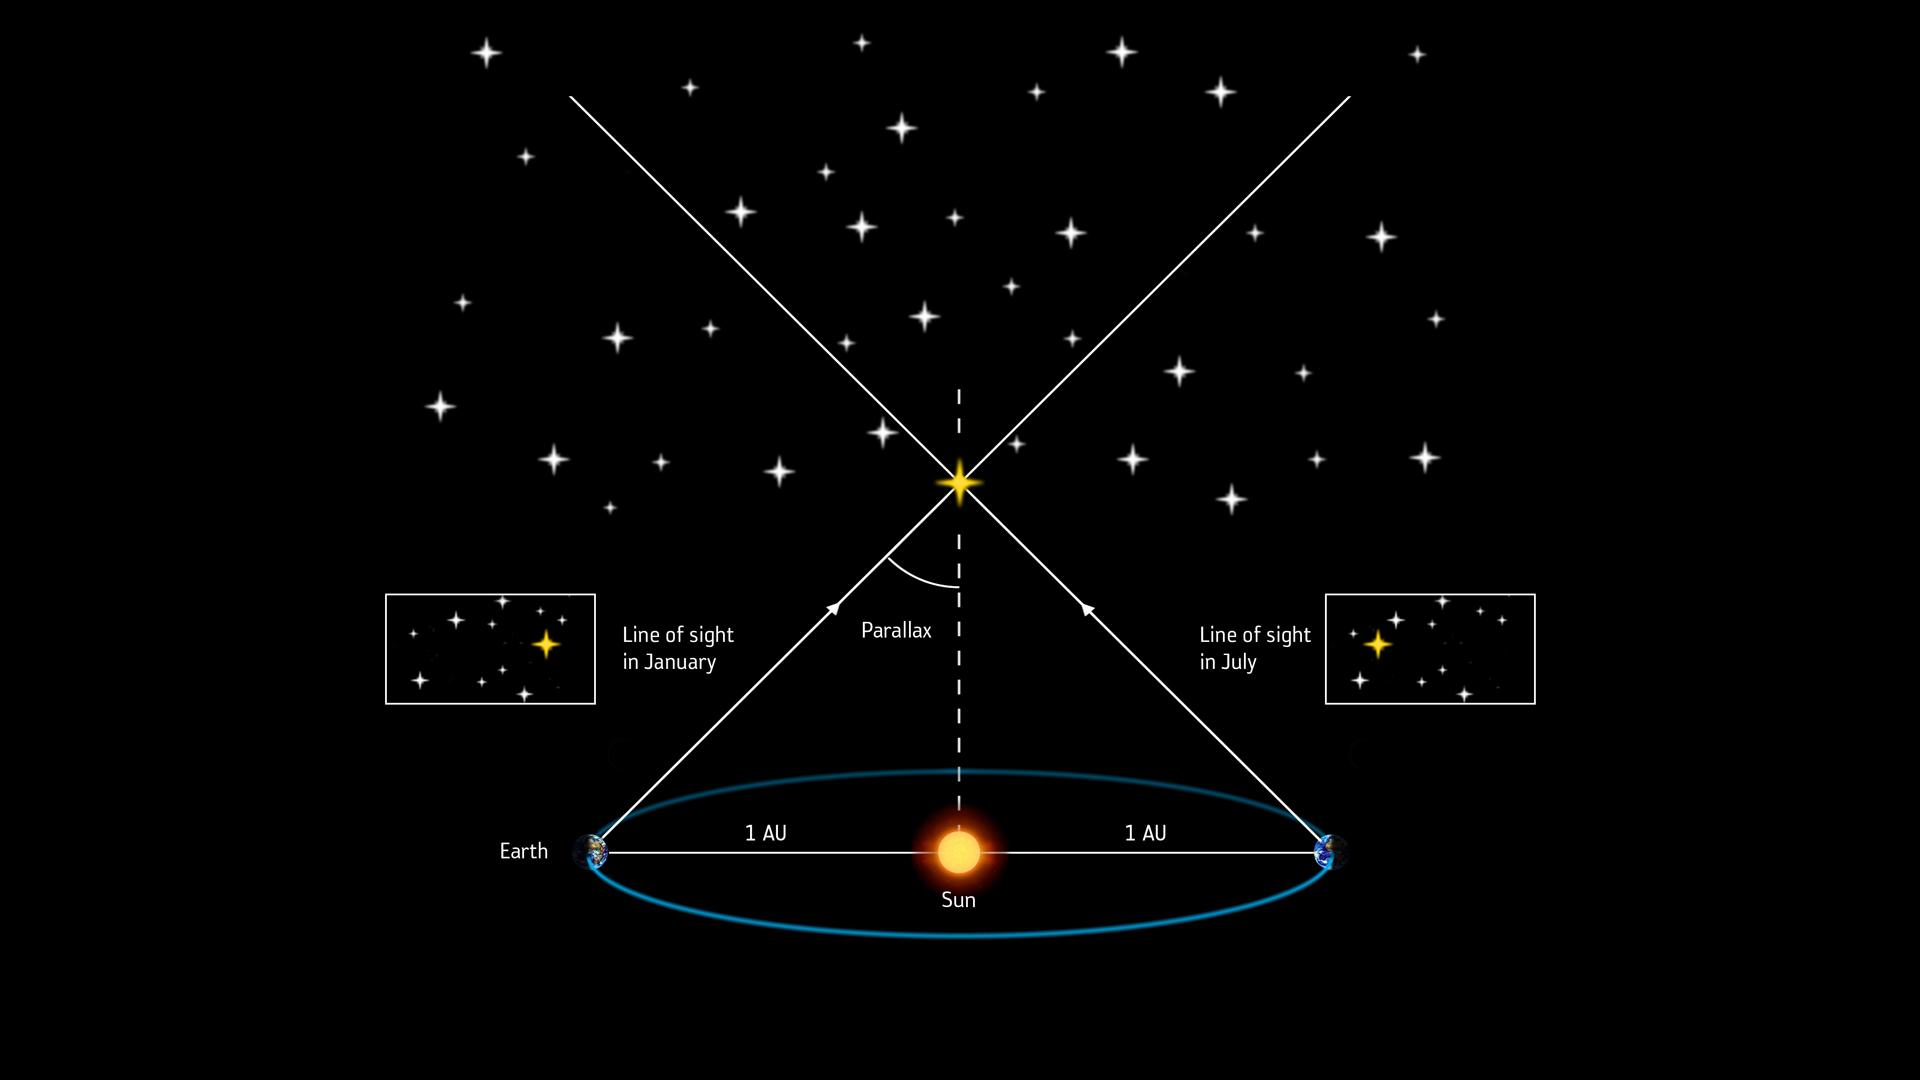 What Is Parallax? - How Astronomers Measure Stellar Distance